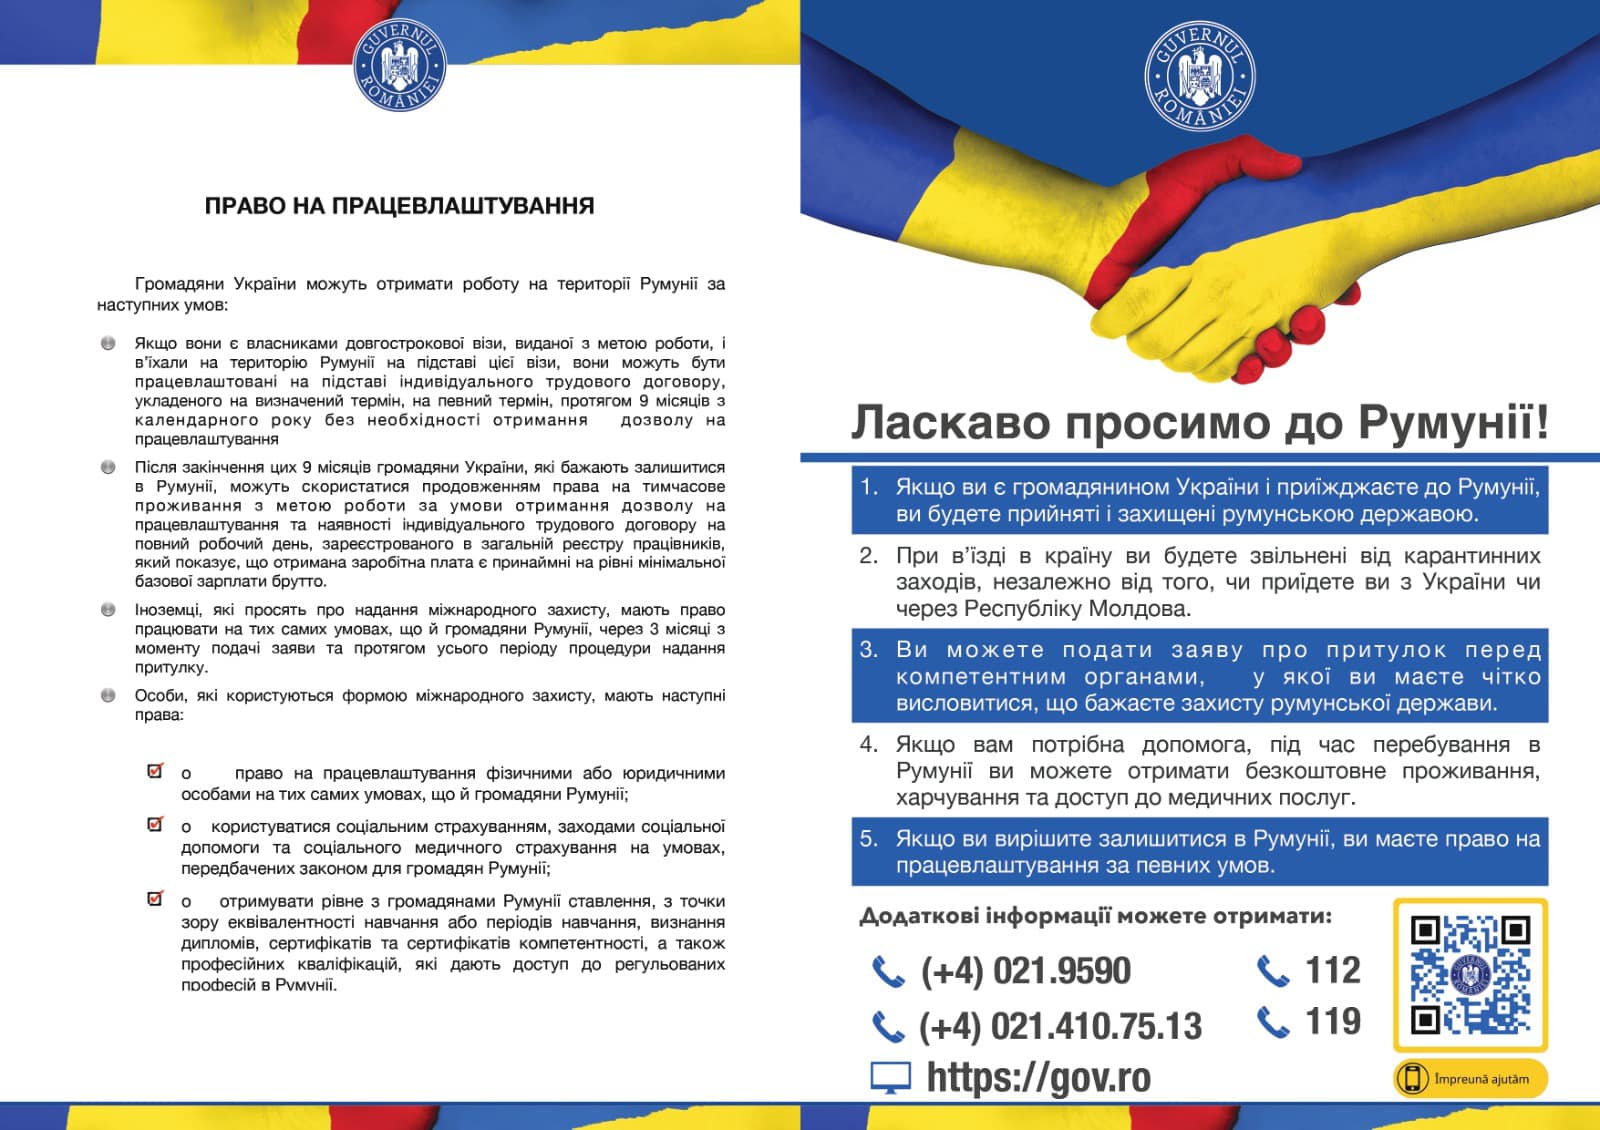 Important information for Ukranians arriving in Romania